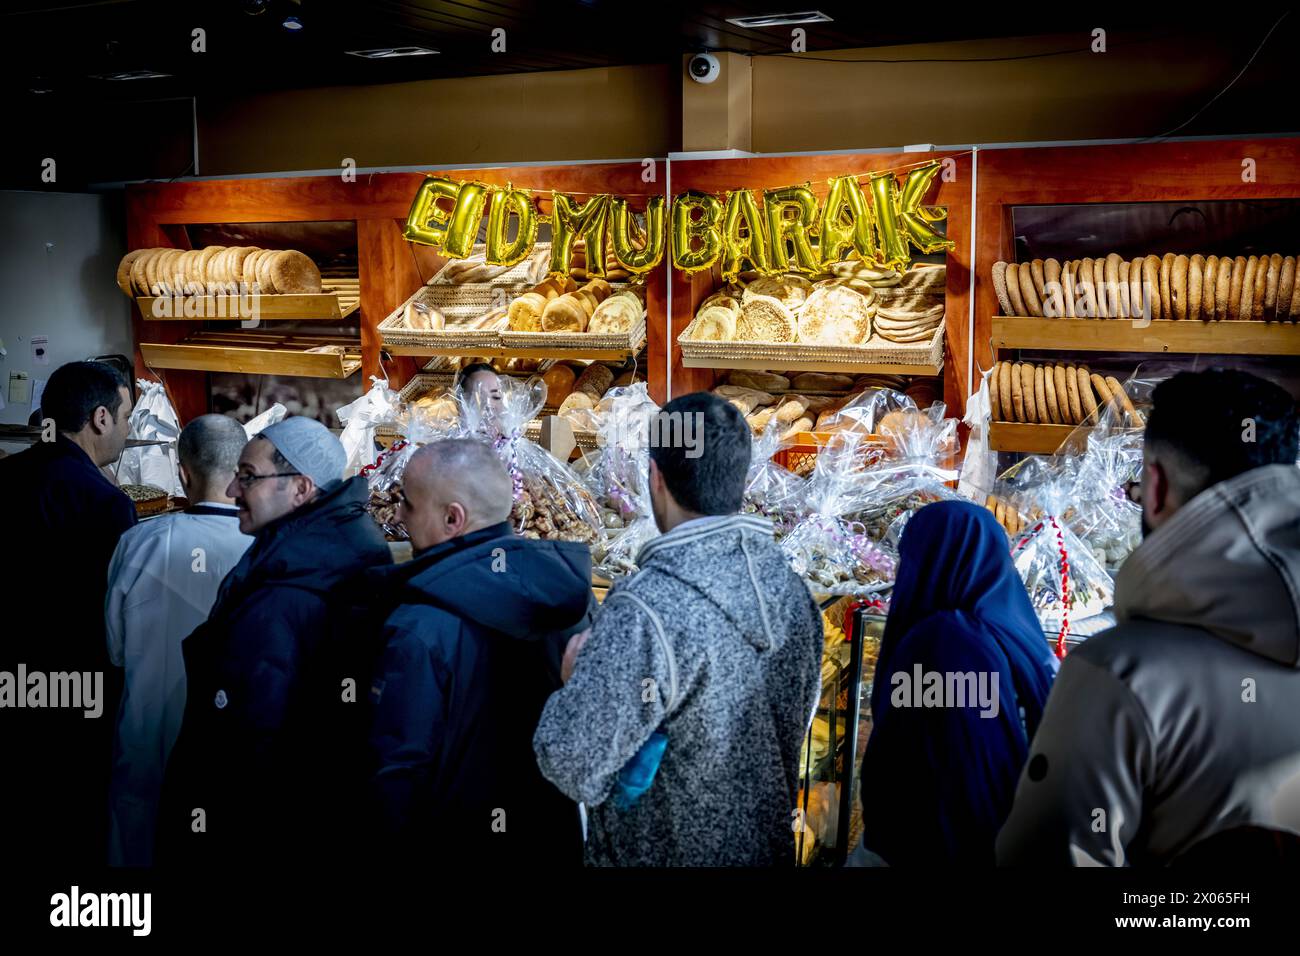 ROTTERDAM - Busy at a bakery during Eid-al-Fitr, also known as Eid-al-Fitr. The festival marks the end of the Islamic fasting month of Ramadan. ANP ROBIN UTRECHT netherlands out - belgium out Stock Photo